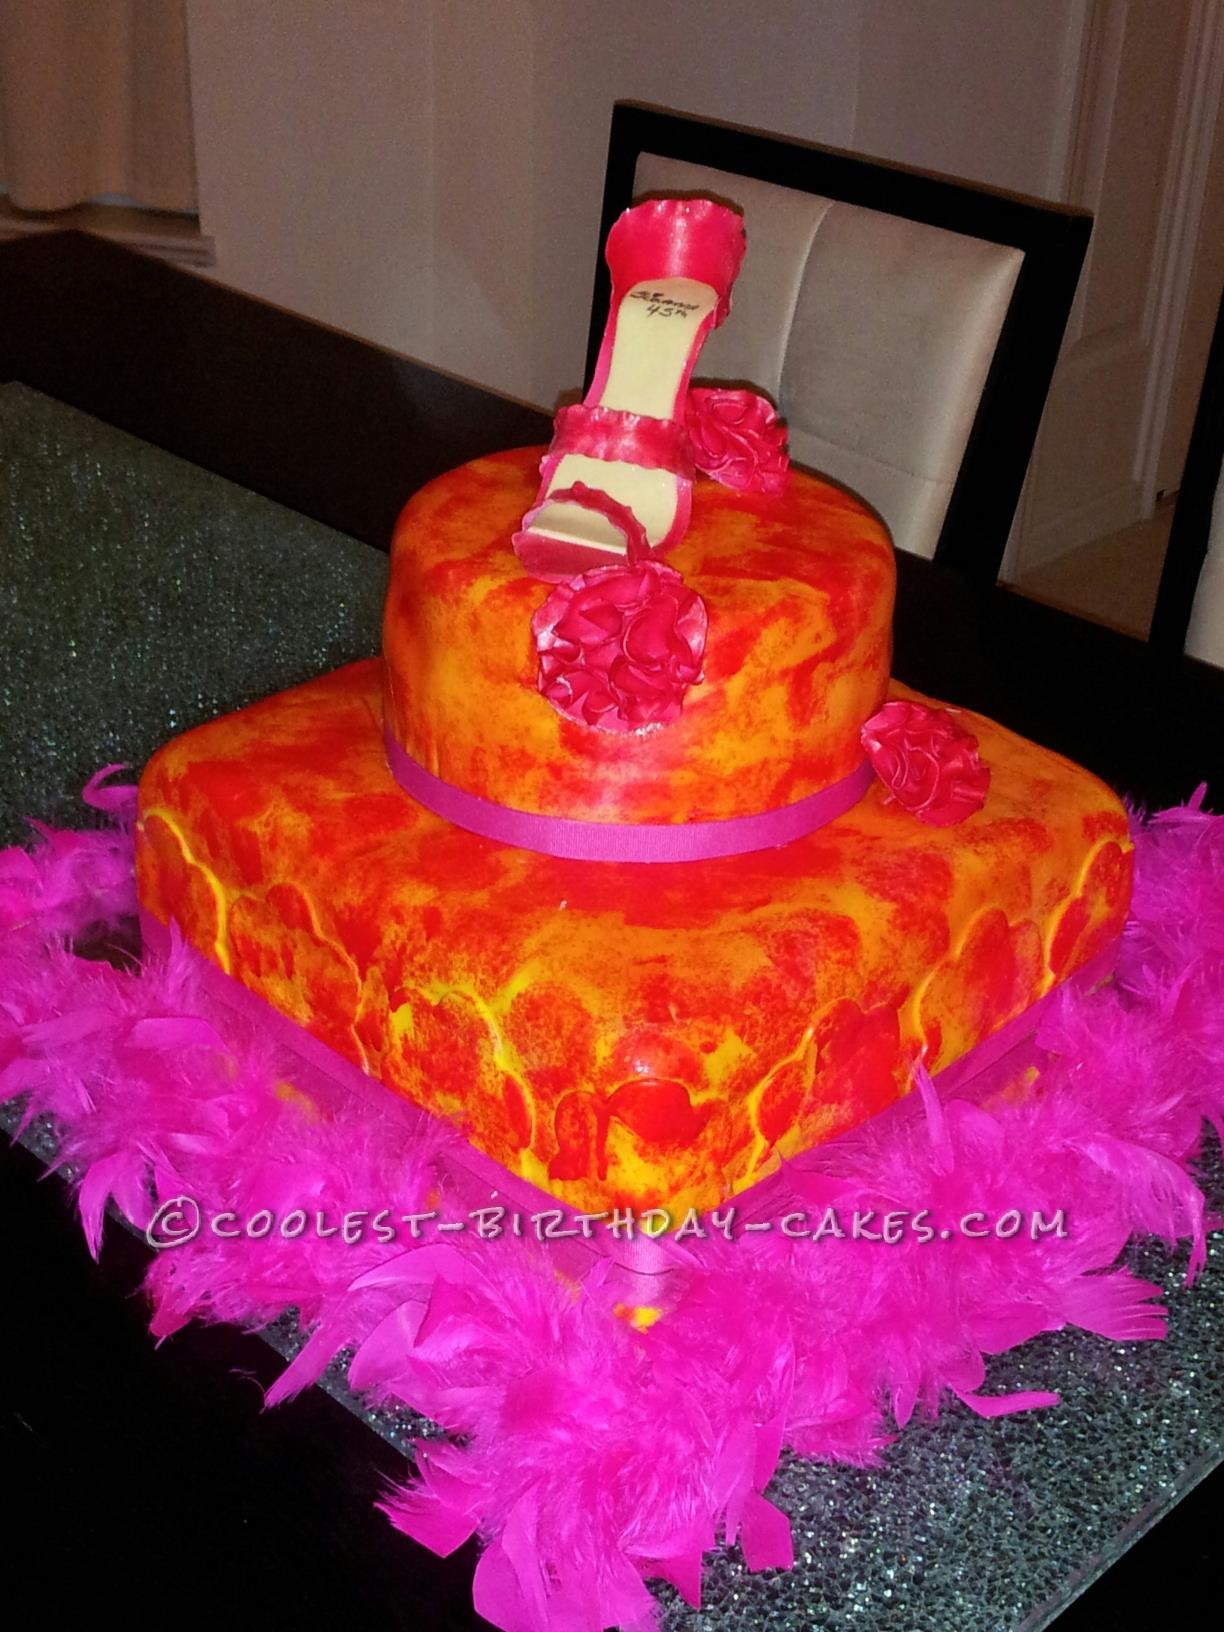 Energetic Birthday Cake for a Shoes Fanatic!